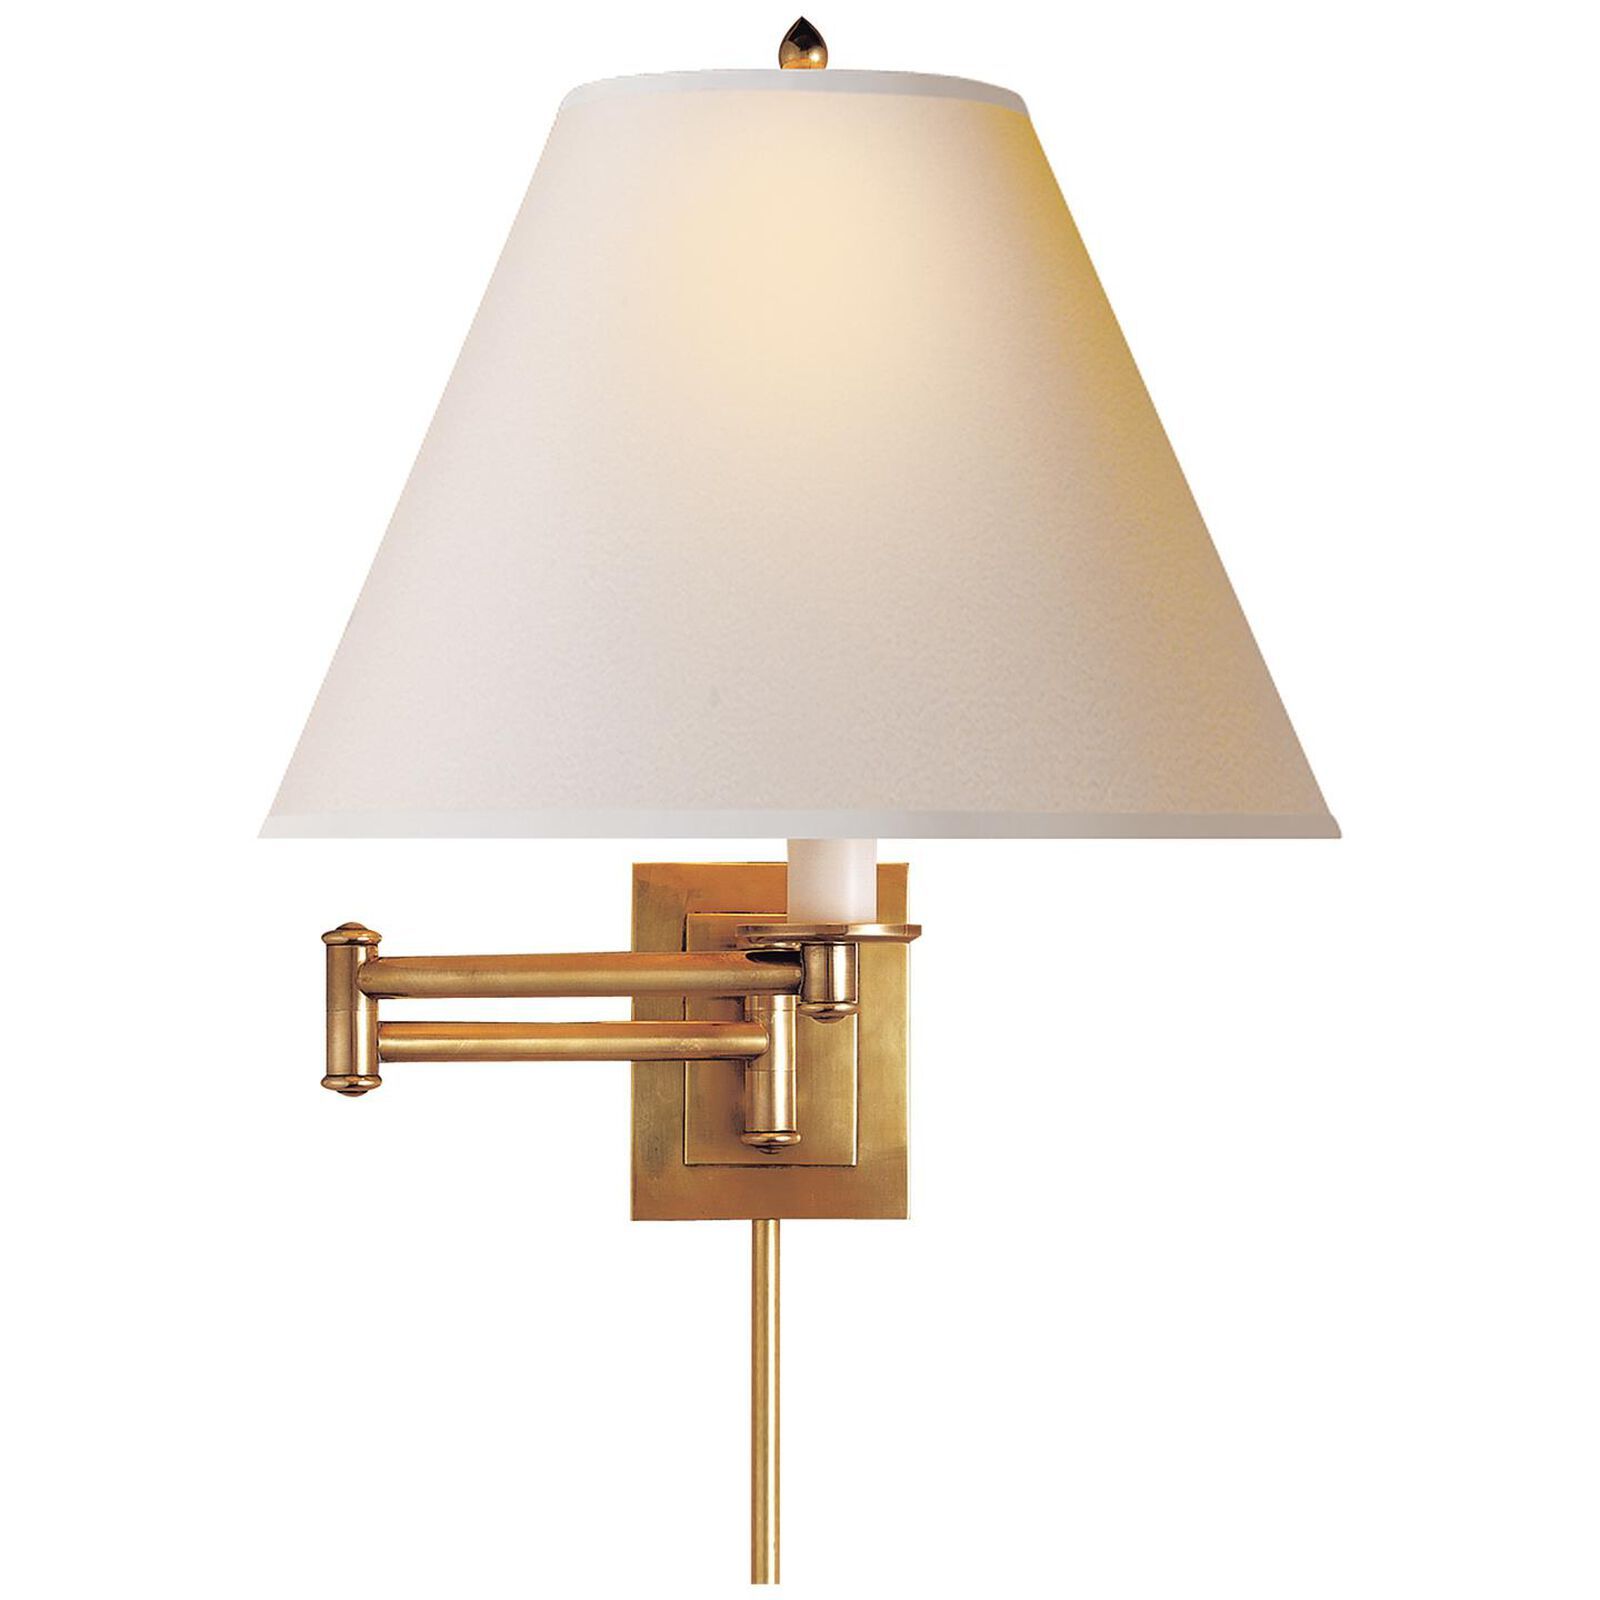 Studio Vc Primitive Swing Arm Wall Swing Lamp by Visual Comfort and Co. | Capitol Lighting 1800lighting.com